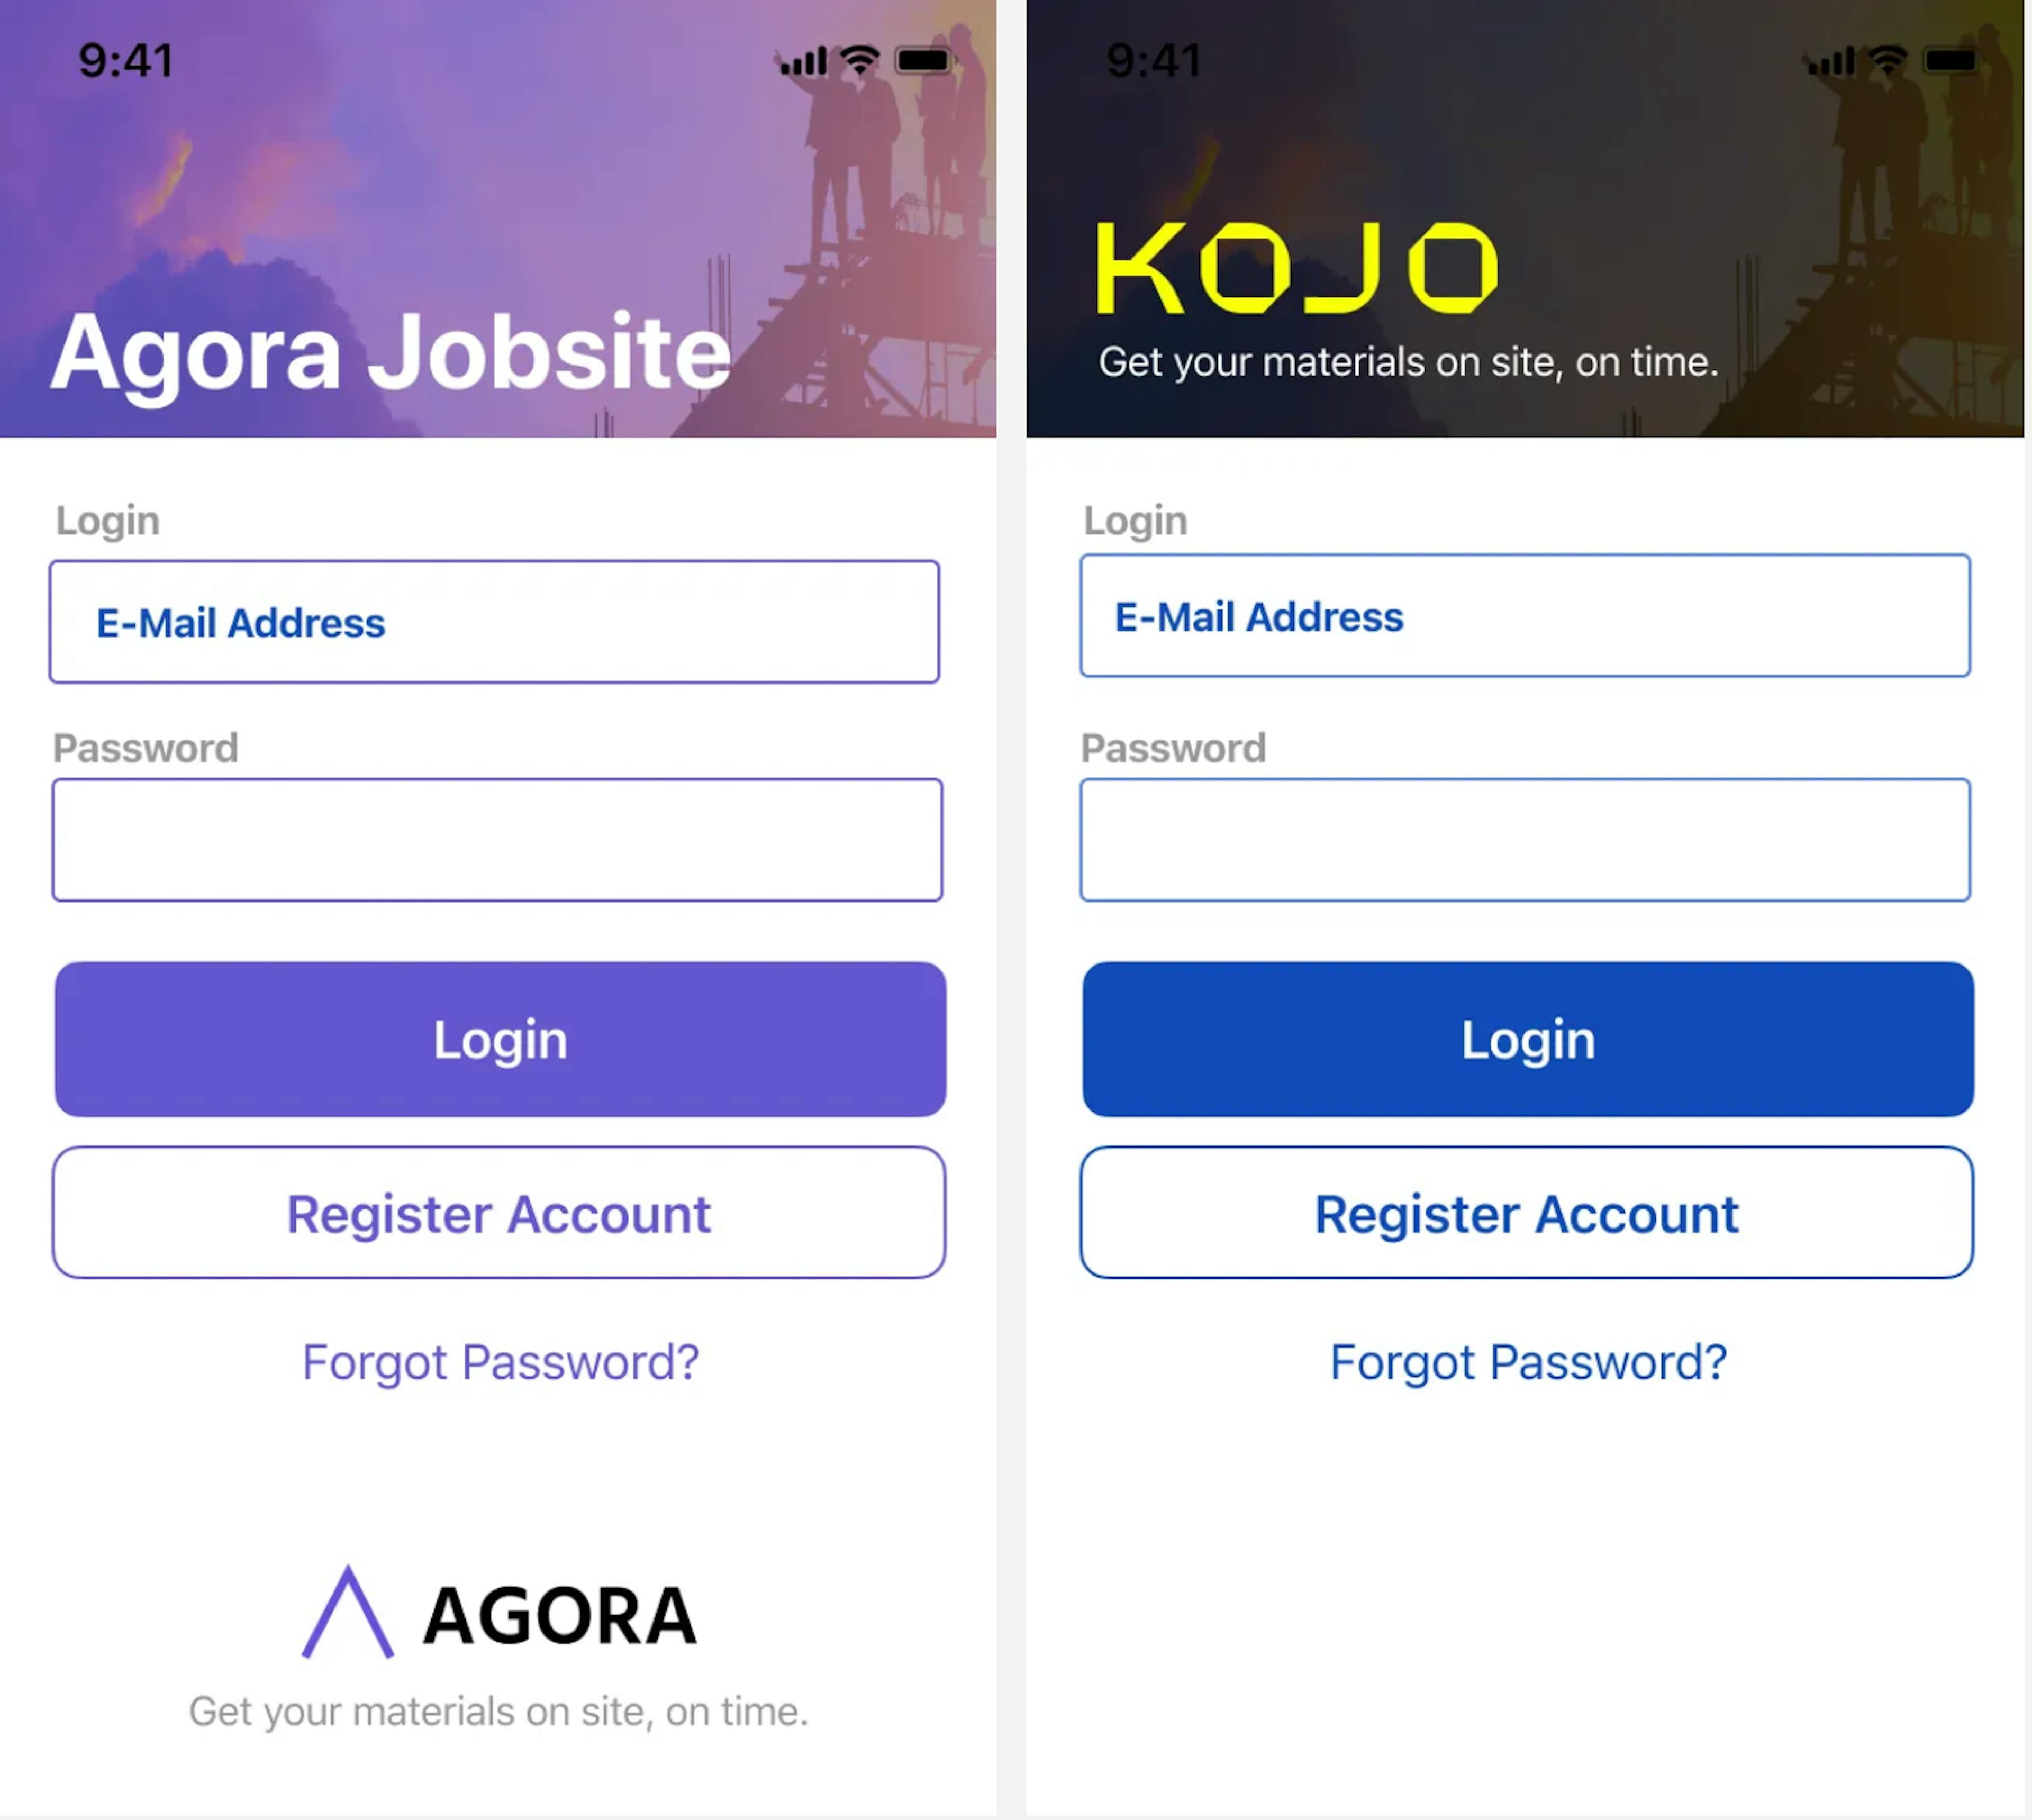 Our old Agora login page vs the new Kojo screen